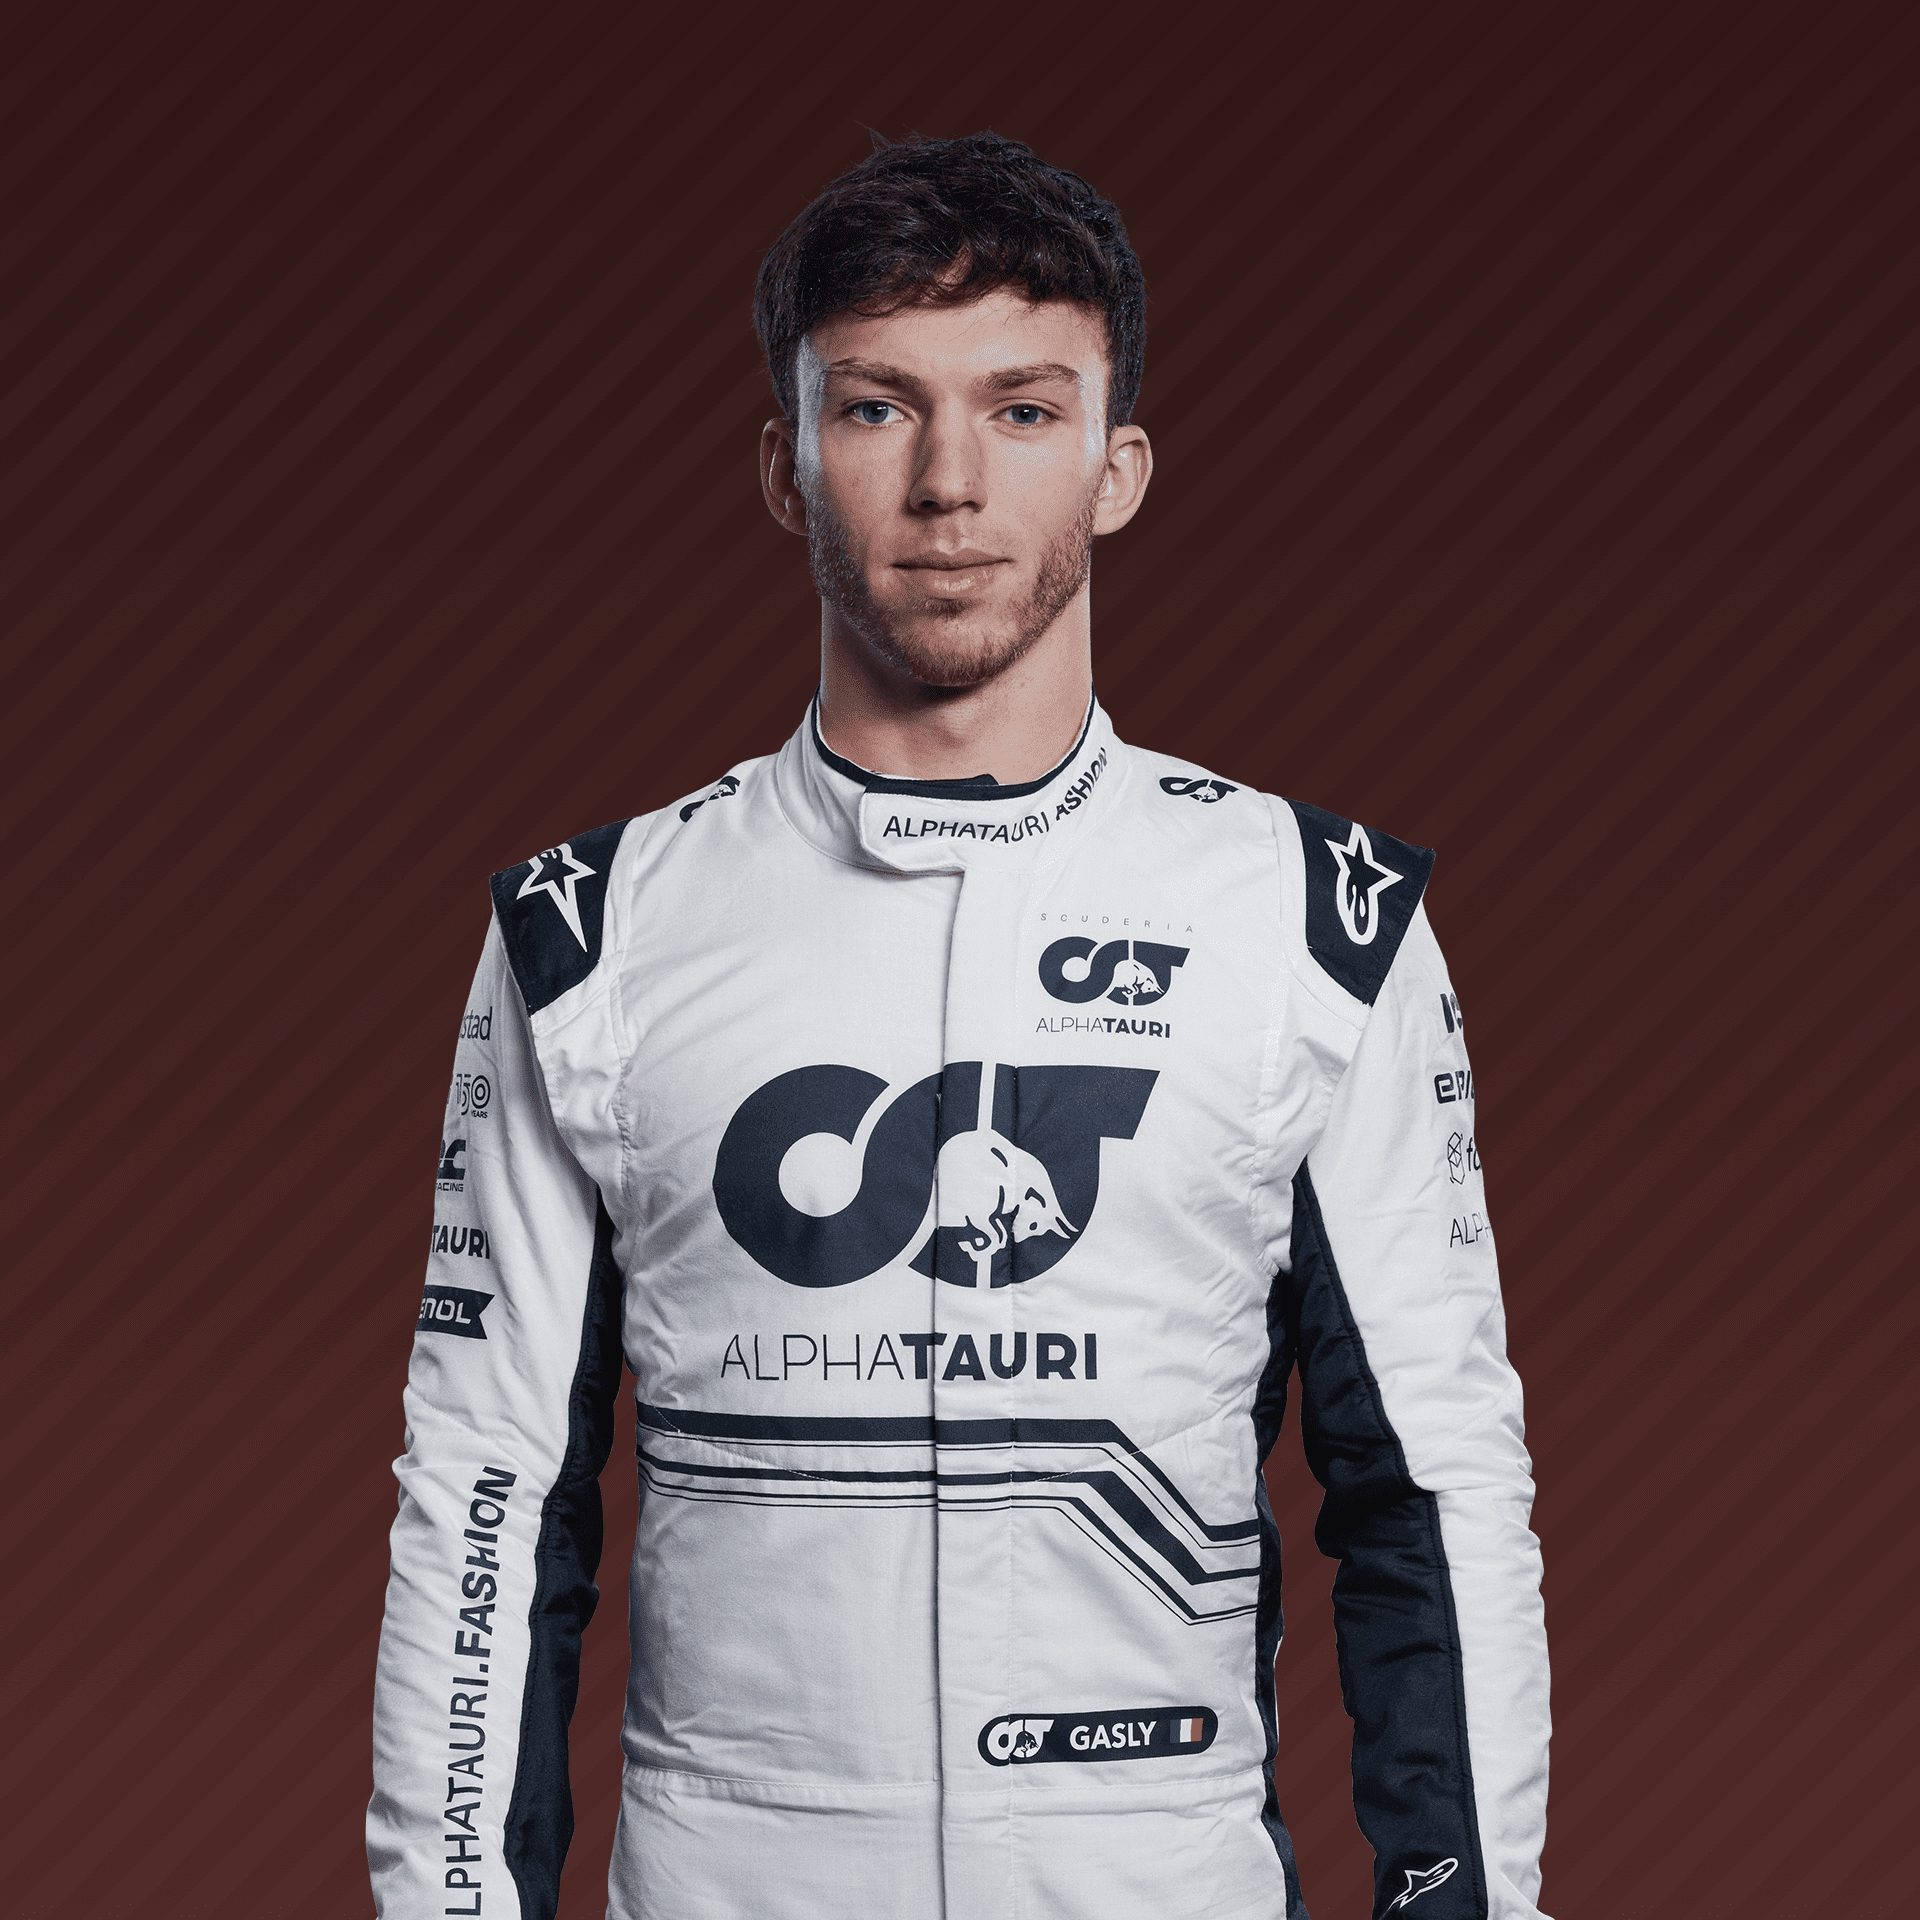 Pierre Gasly - A Determined Force In Formula One Background